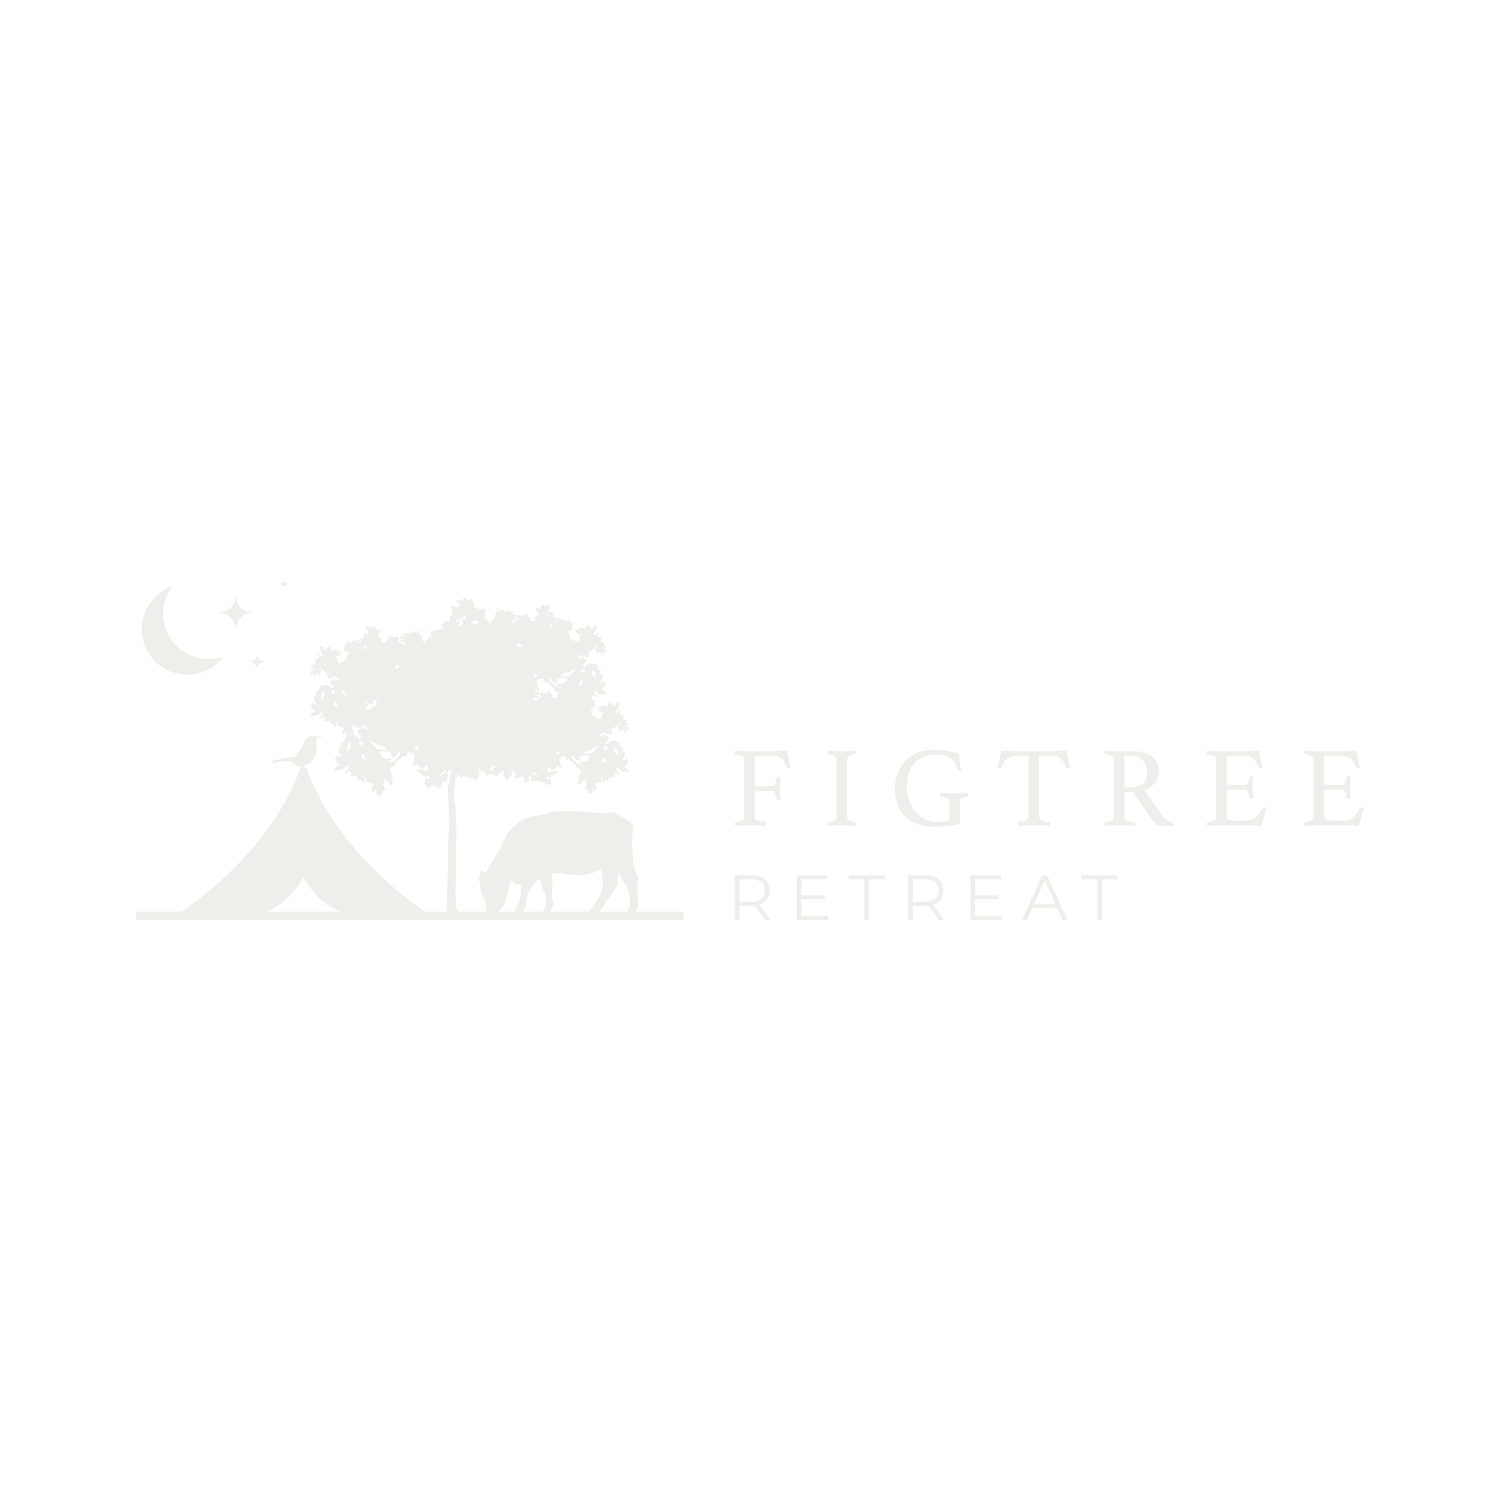 FigTree Retreat